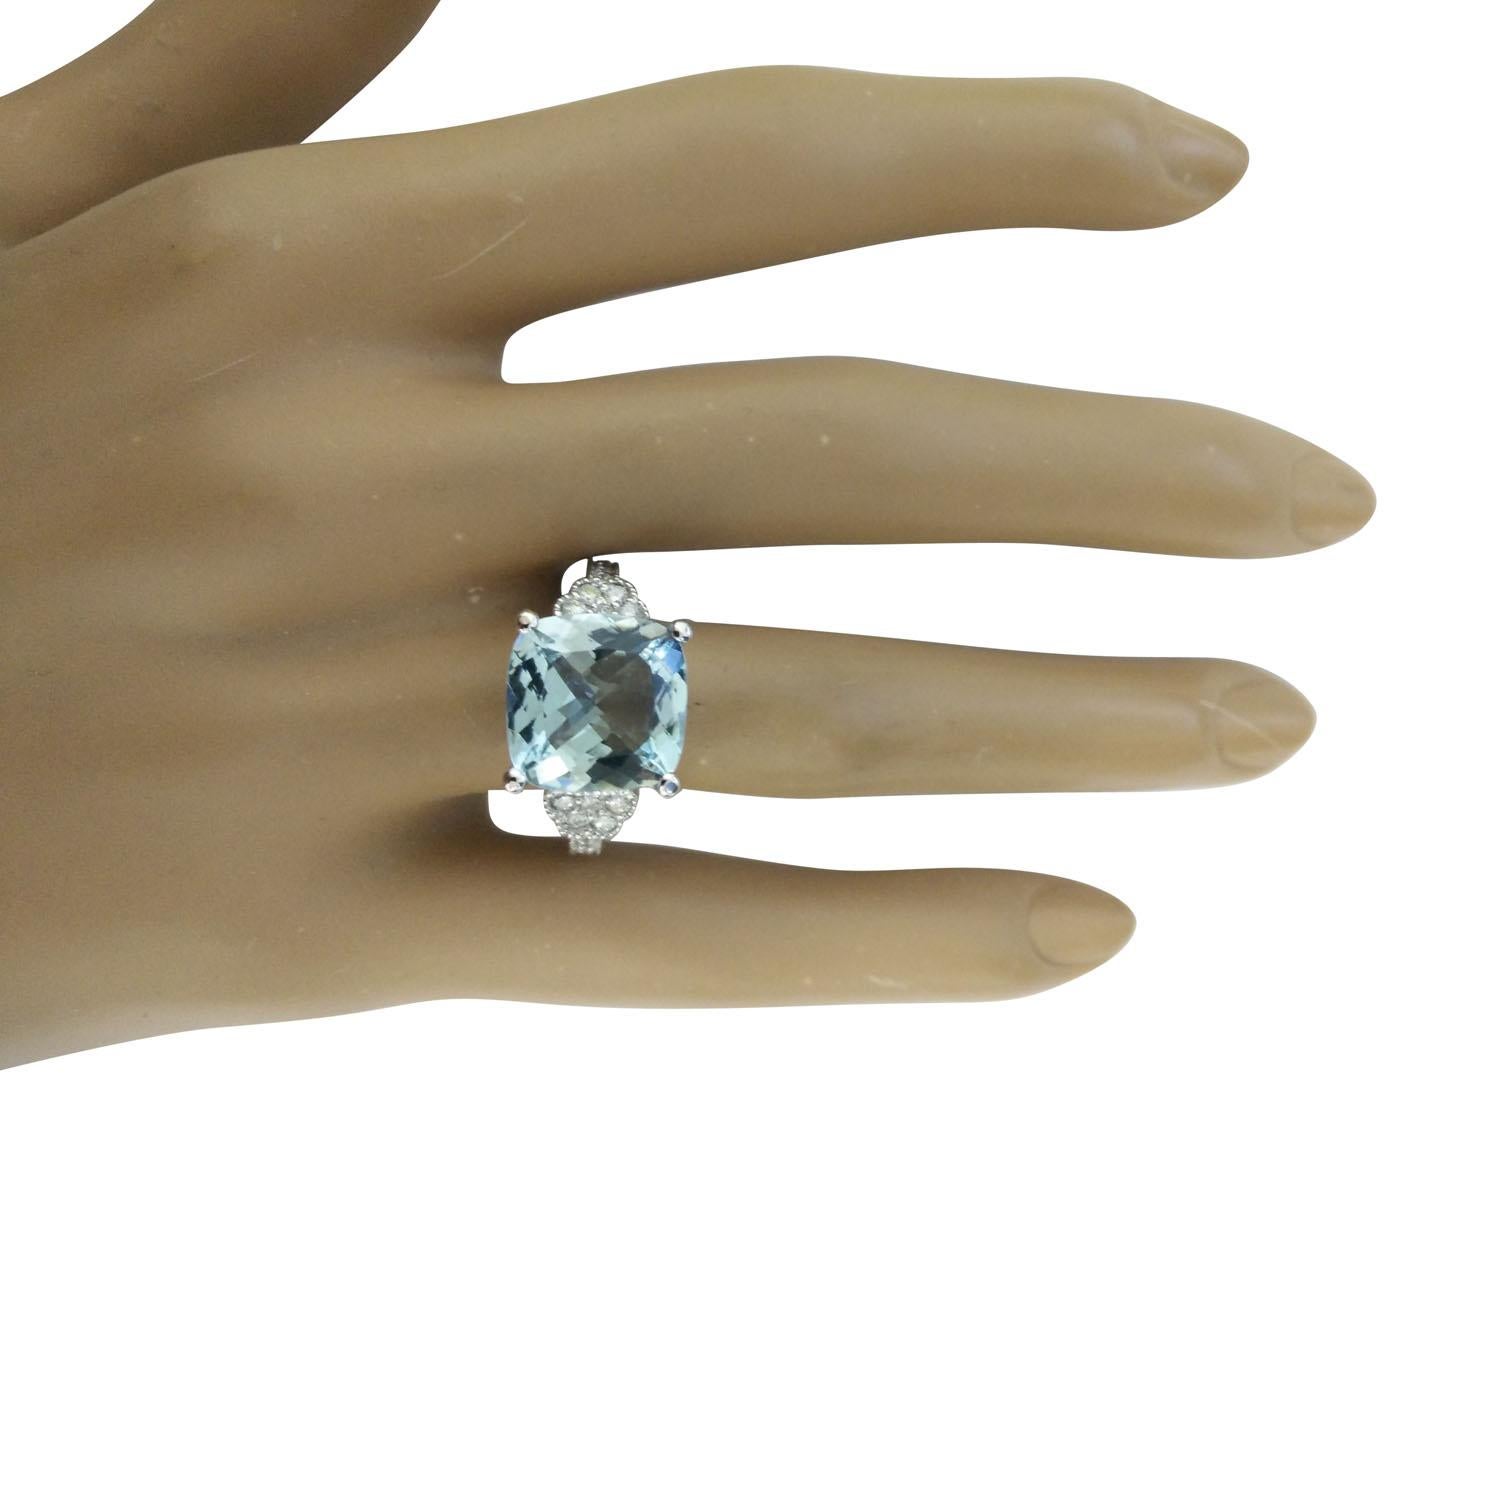 6.45 Carat Natural Aquamarine 14 Karat Solid White Gold Diamond Ring
Stamped: 14K 
Total Ring Weight: 6.7 Grams 
Aquamarine Weight: 6.20 Carat (12.00x12.00 Millimeters)  
Diamond Weight: 0.25 Carat (F-G Color, VS2-SI1 Clarity )
Quantity: 20
Face